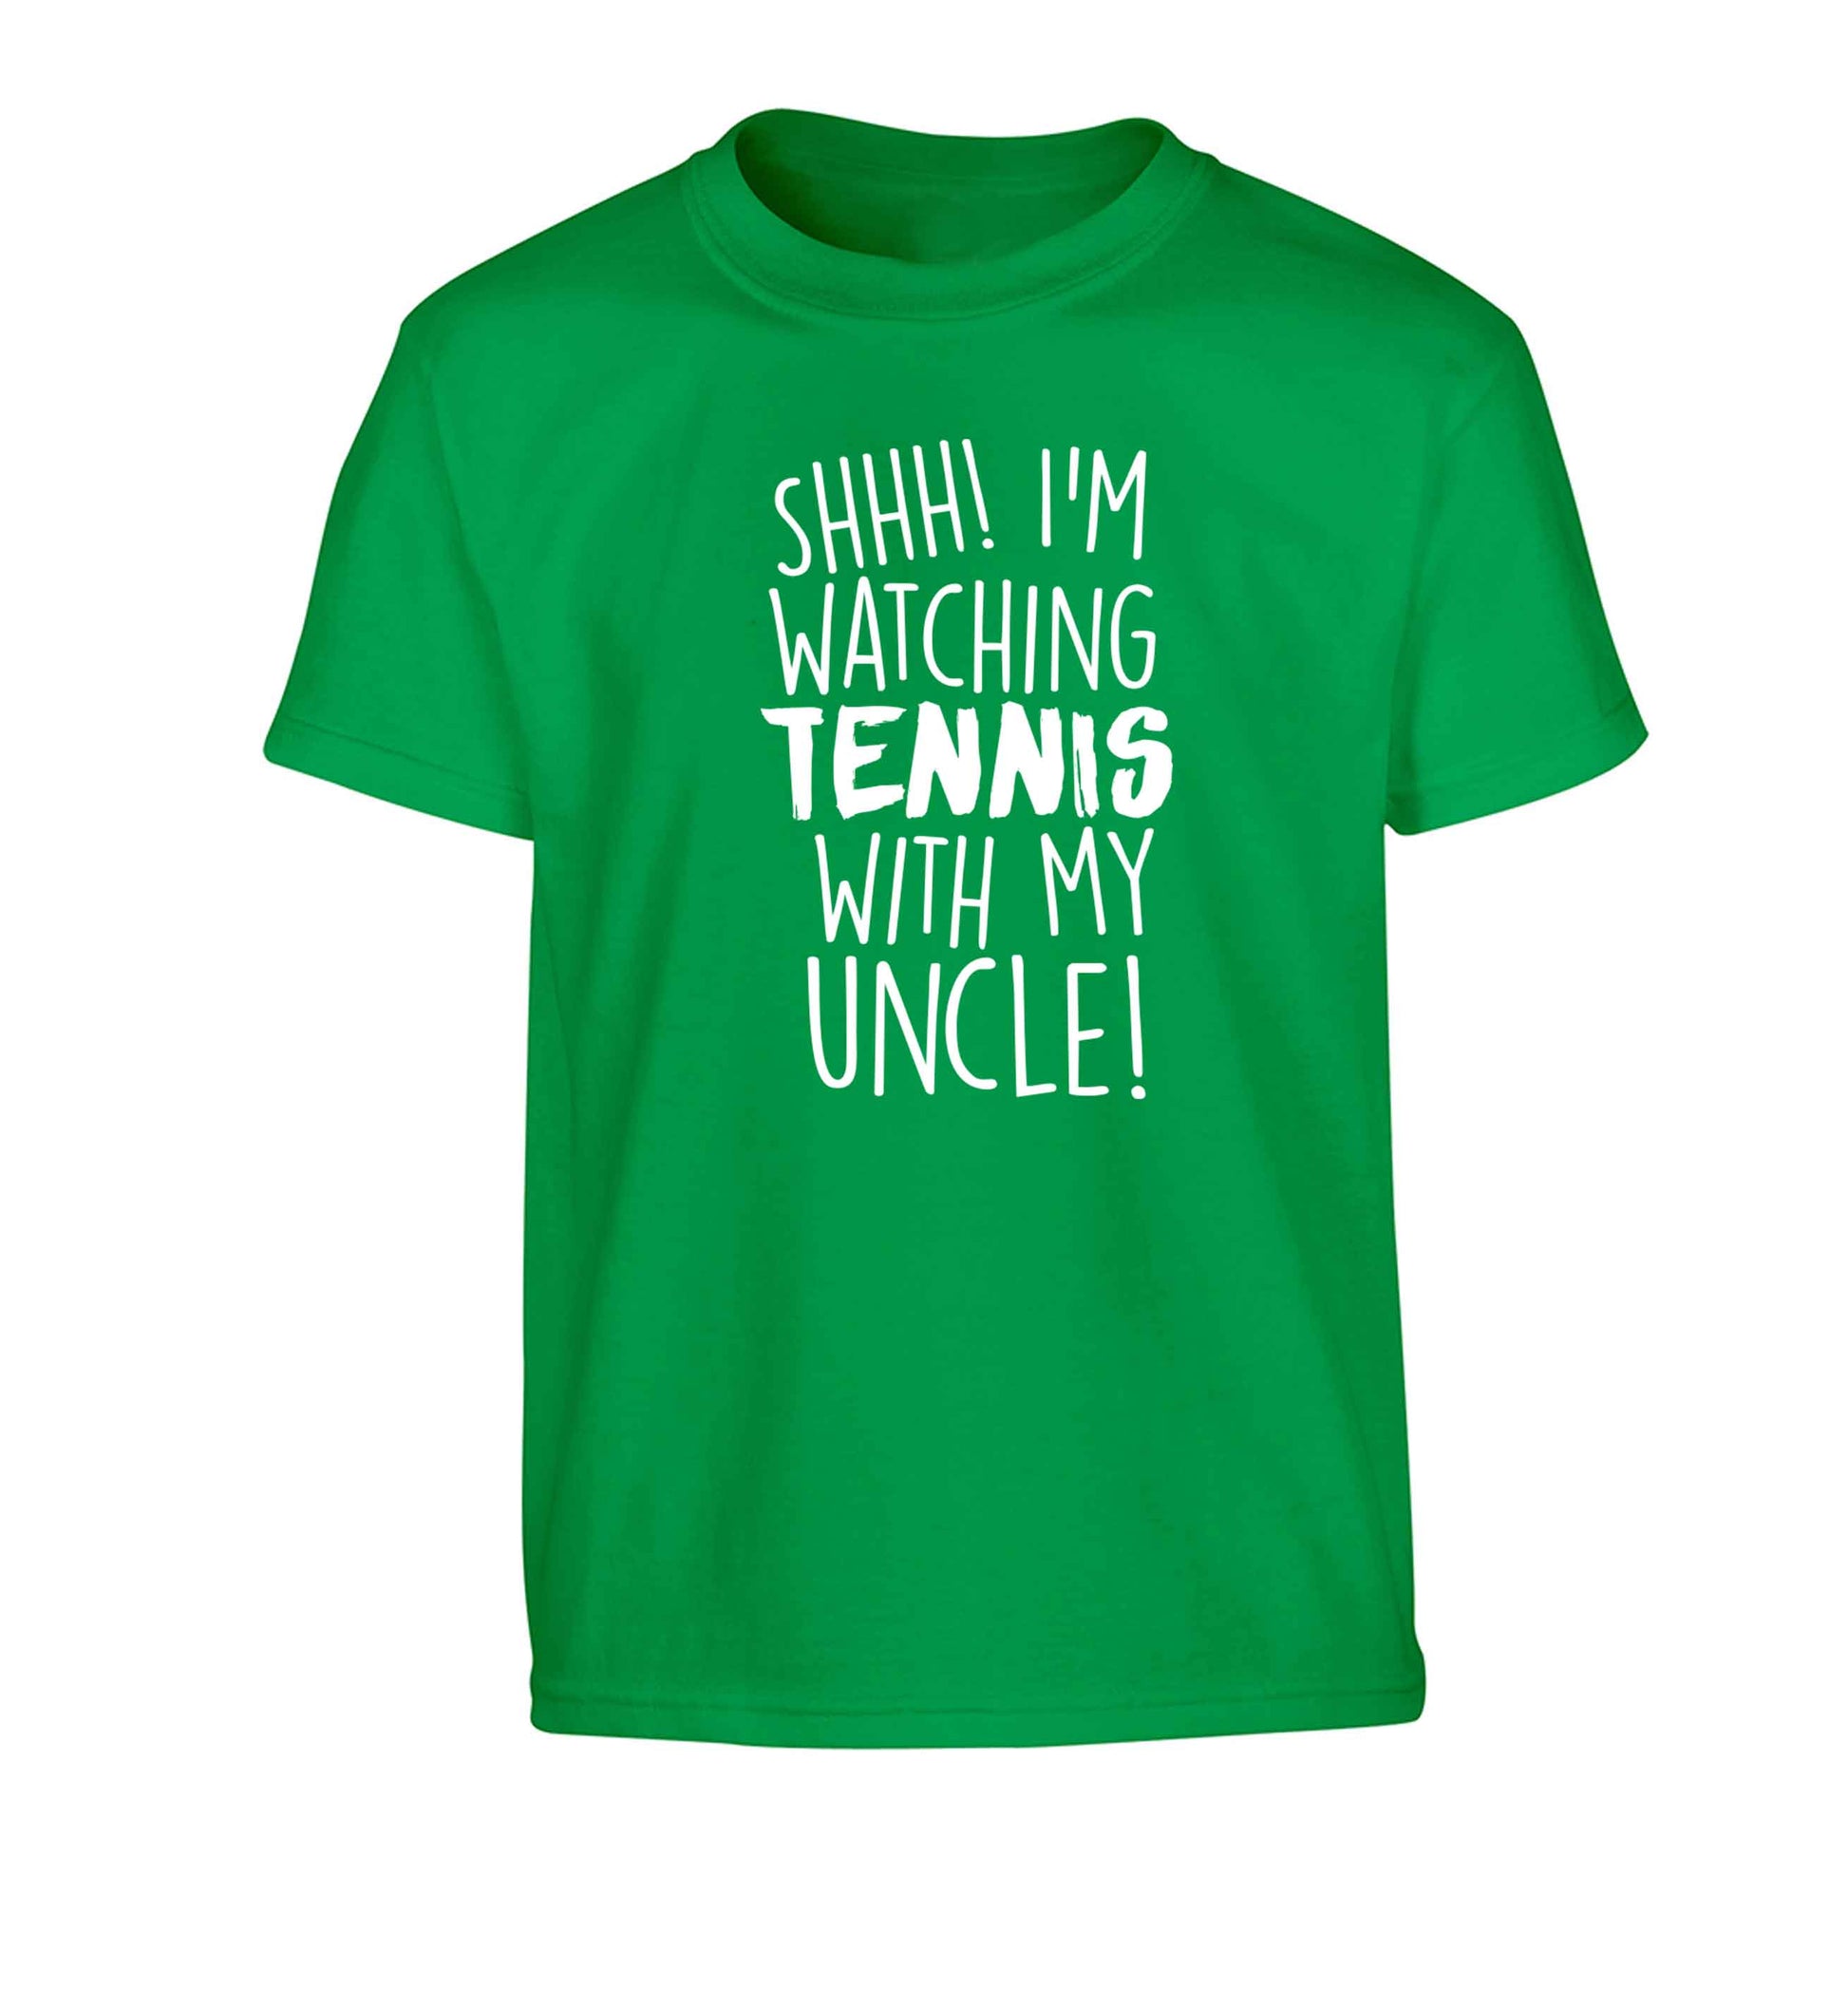 Shh! I'm watching tennis with my uncle! Children's green Tshirt 12-13 Years